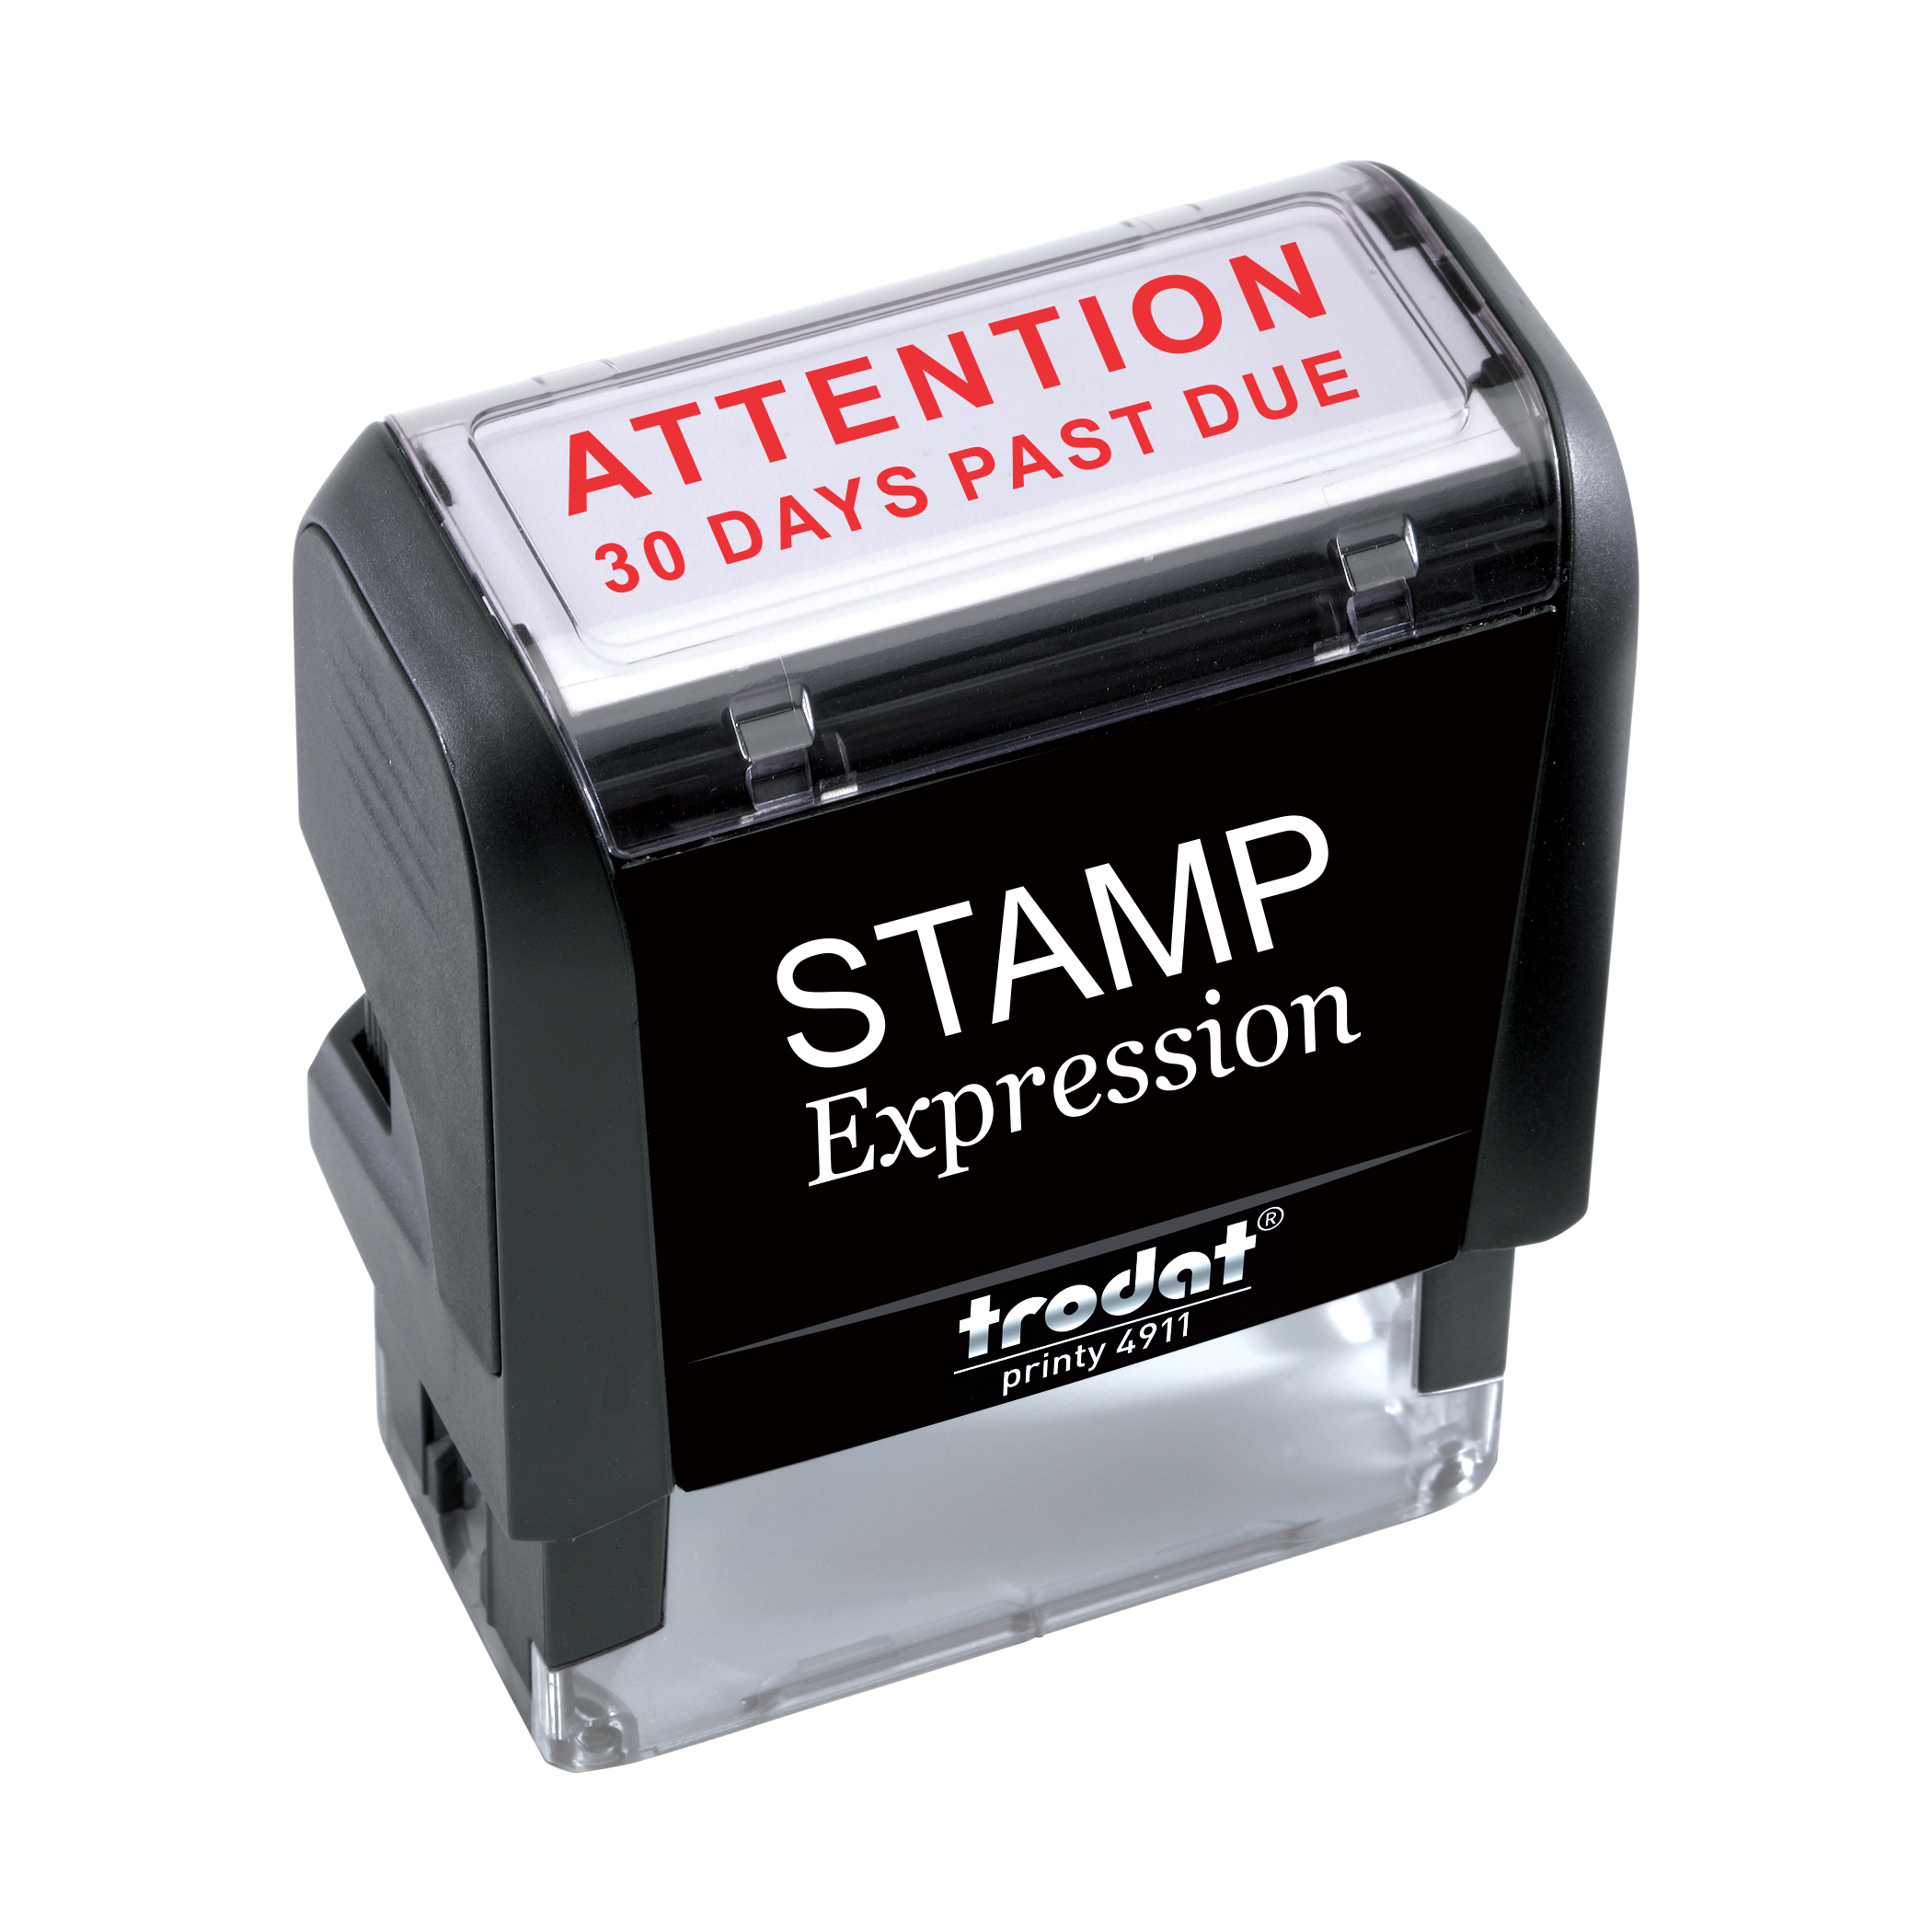 Attention 30 Days Past Due Office Self Inking Rubber Stamp